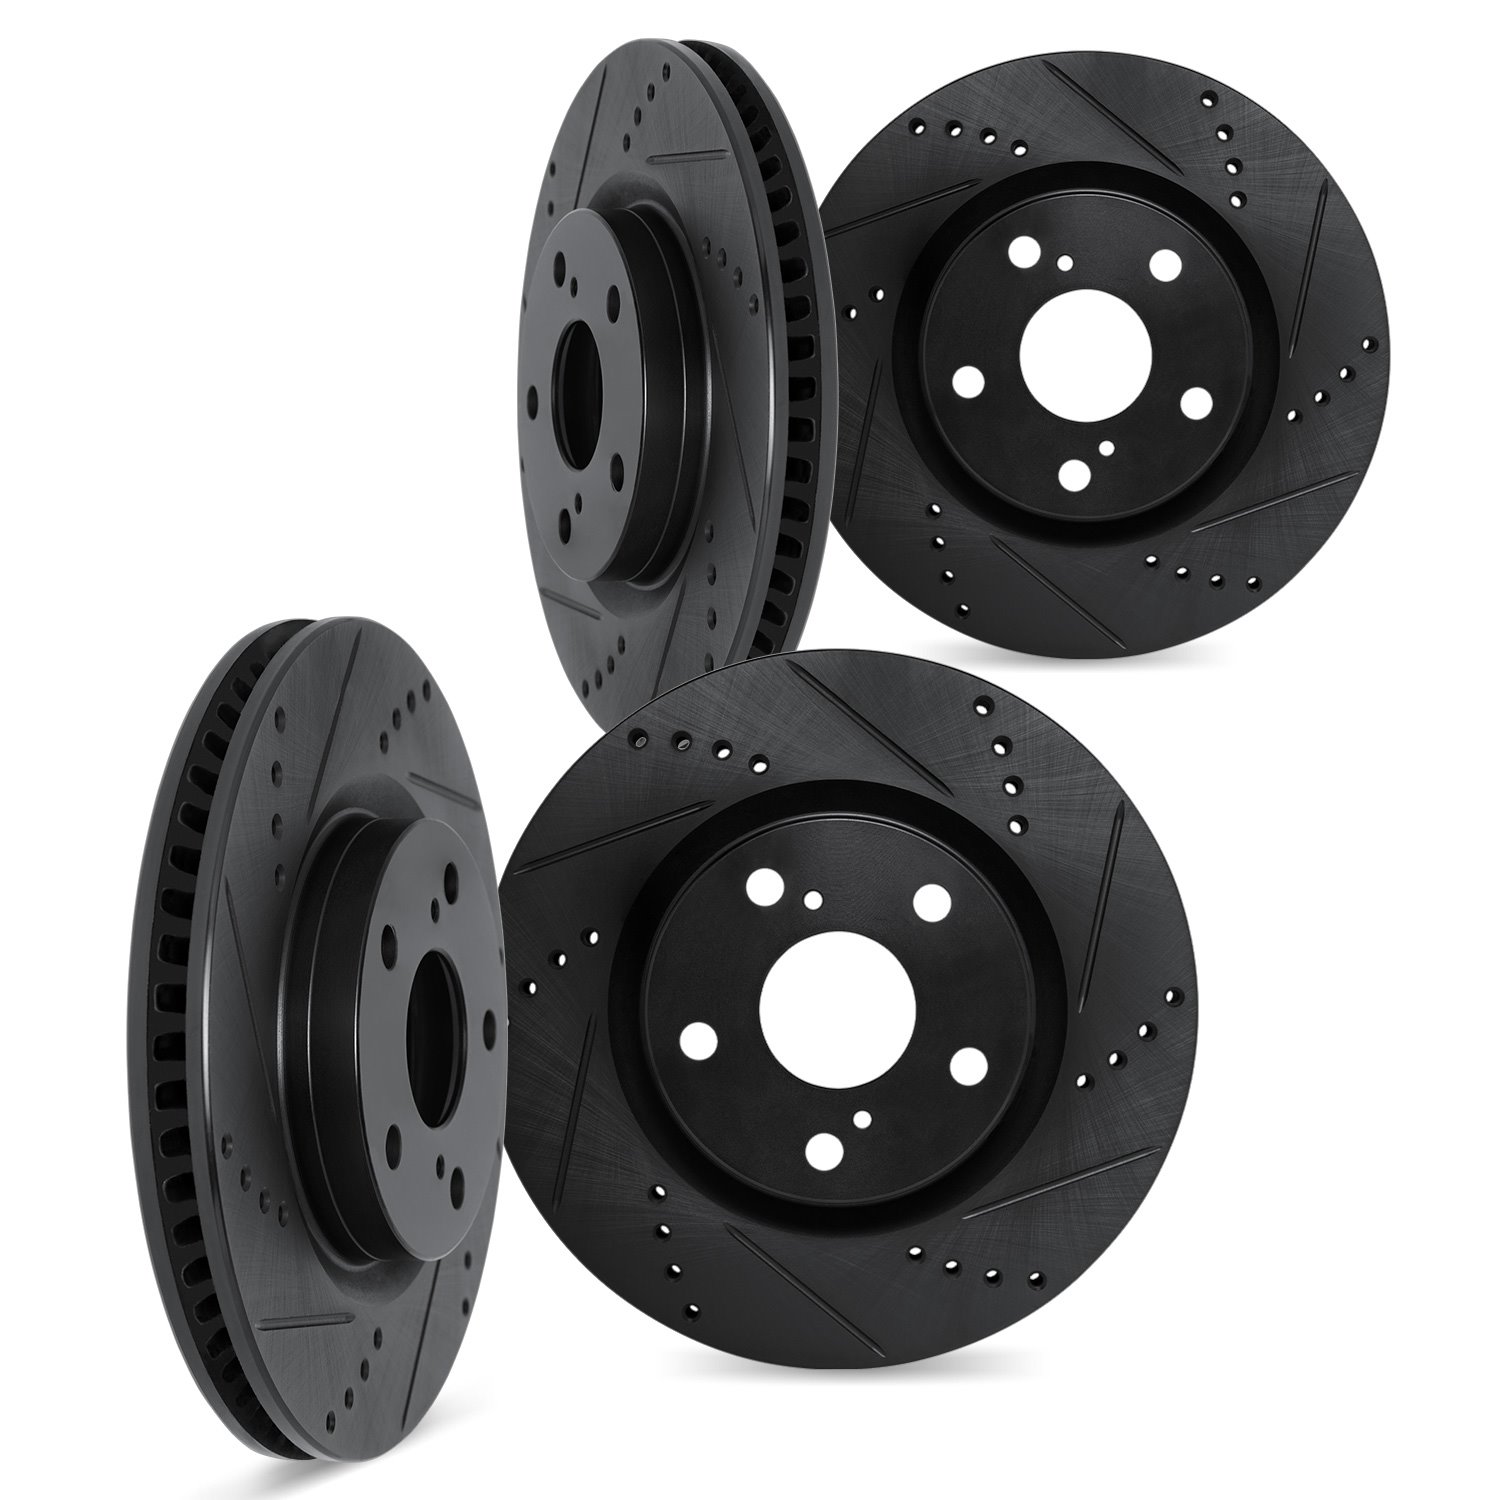 8004-31044 Drilled/Slotted Brake Rotors [Black], 2004-2010 BMW, Position: Front and Rear